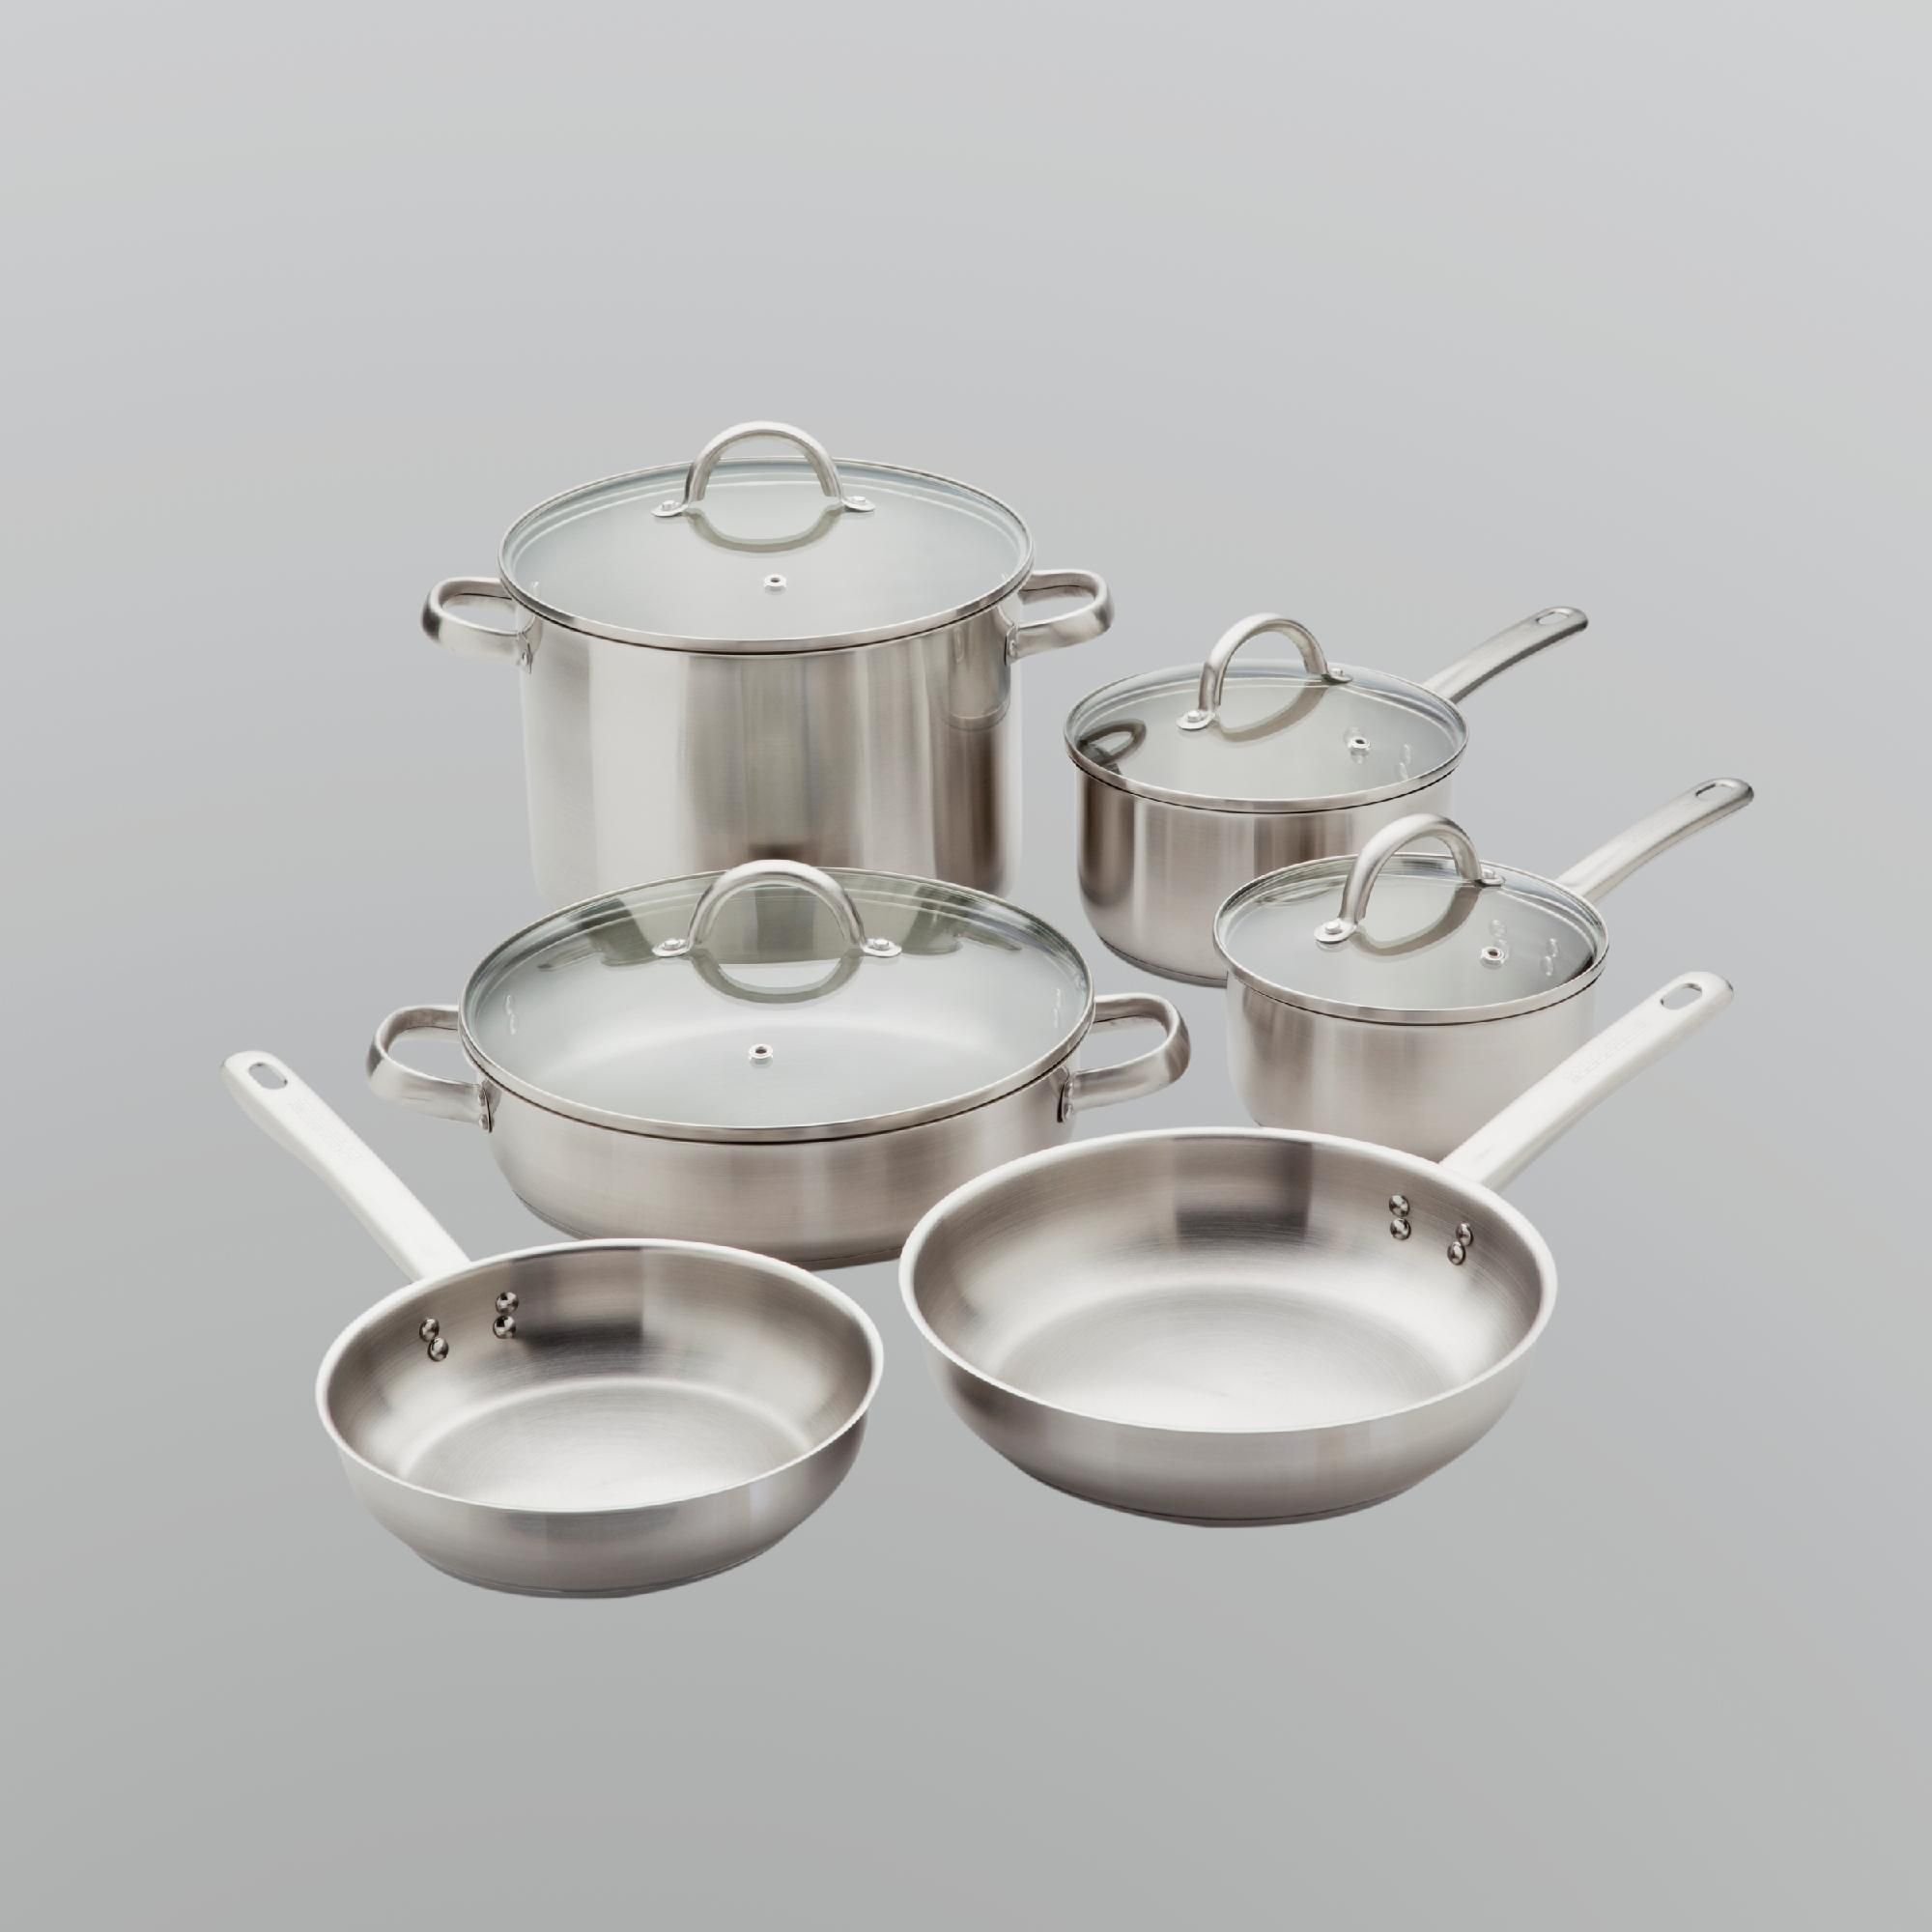 Gordon Ramsay Stainless Steel Cookware